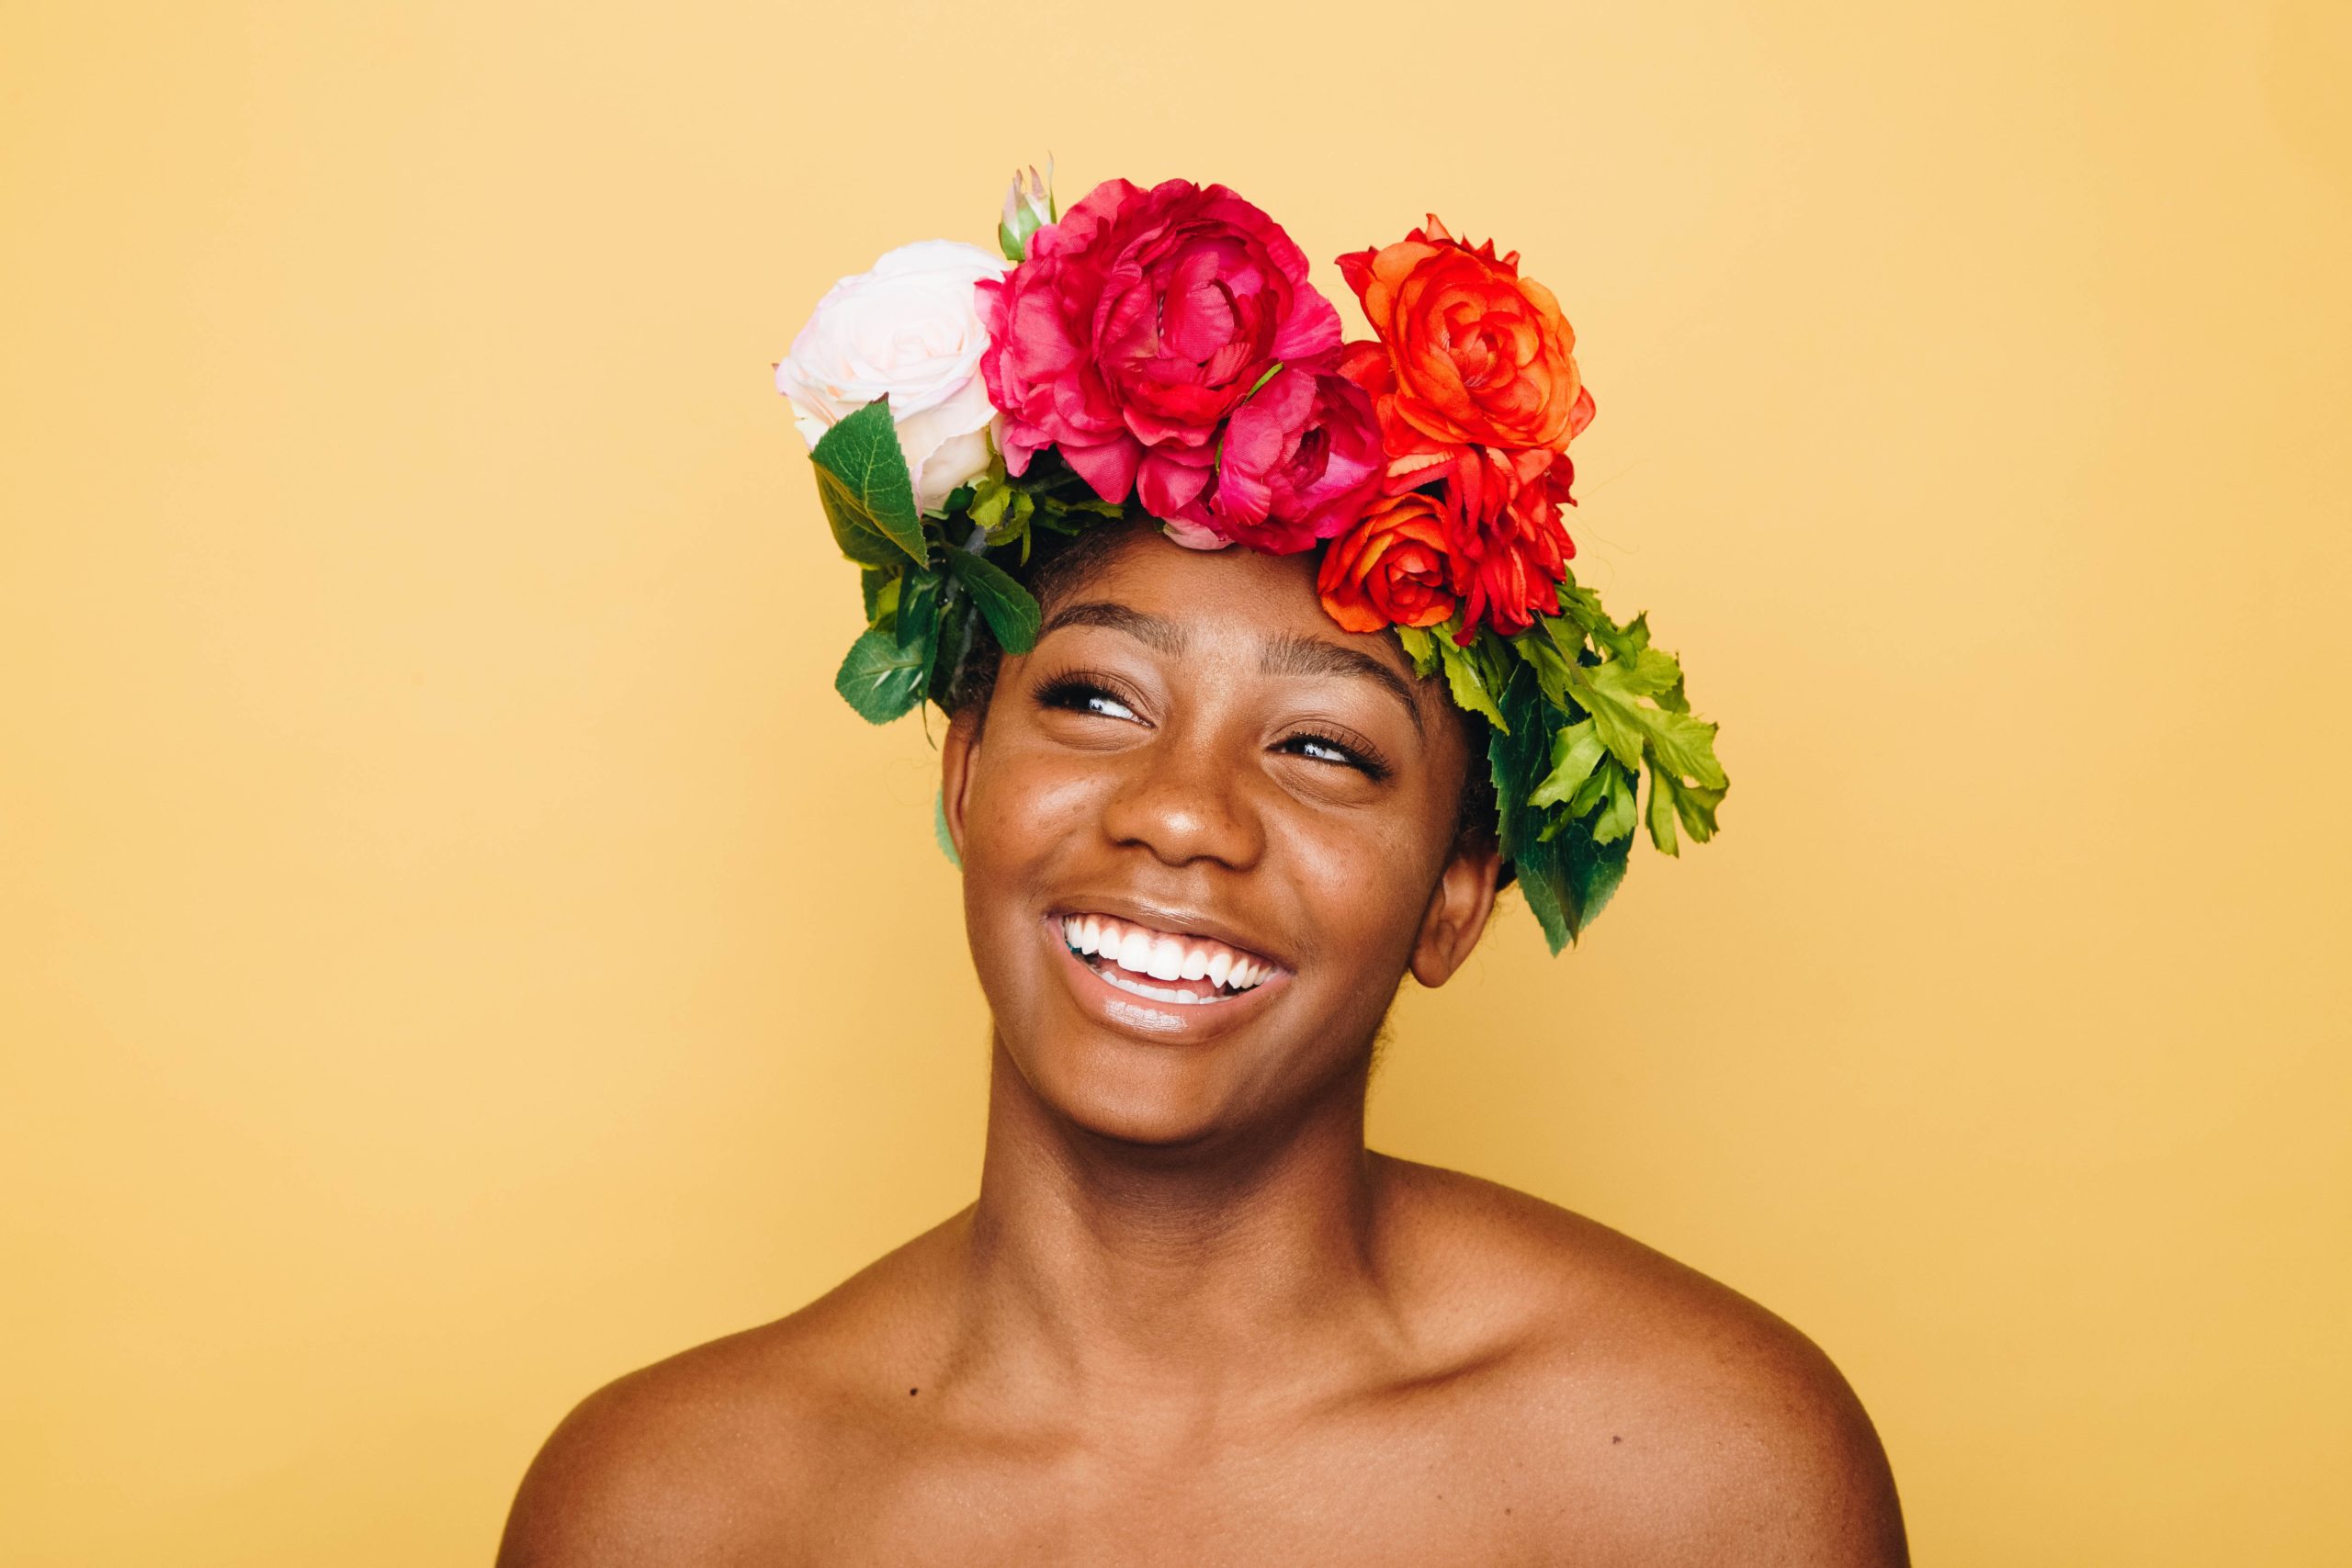 5 Surprising Ways to Feel Good About Yourself